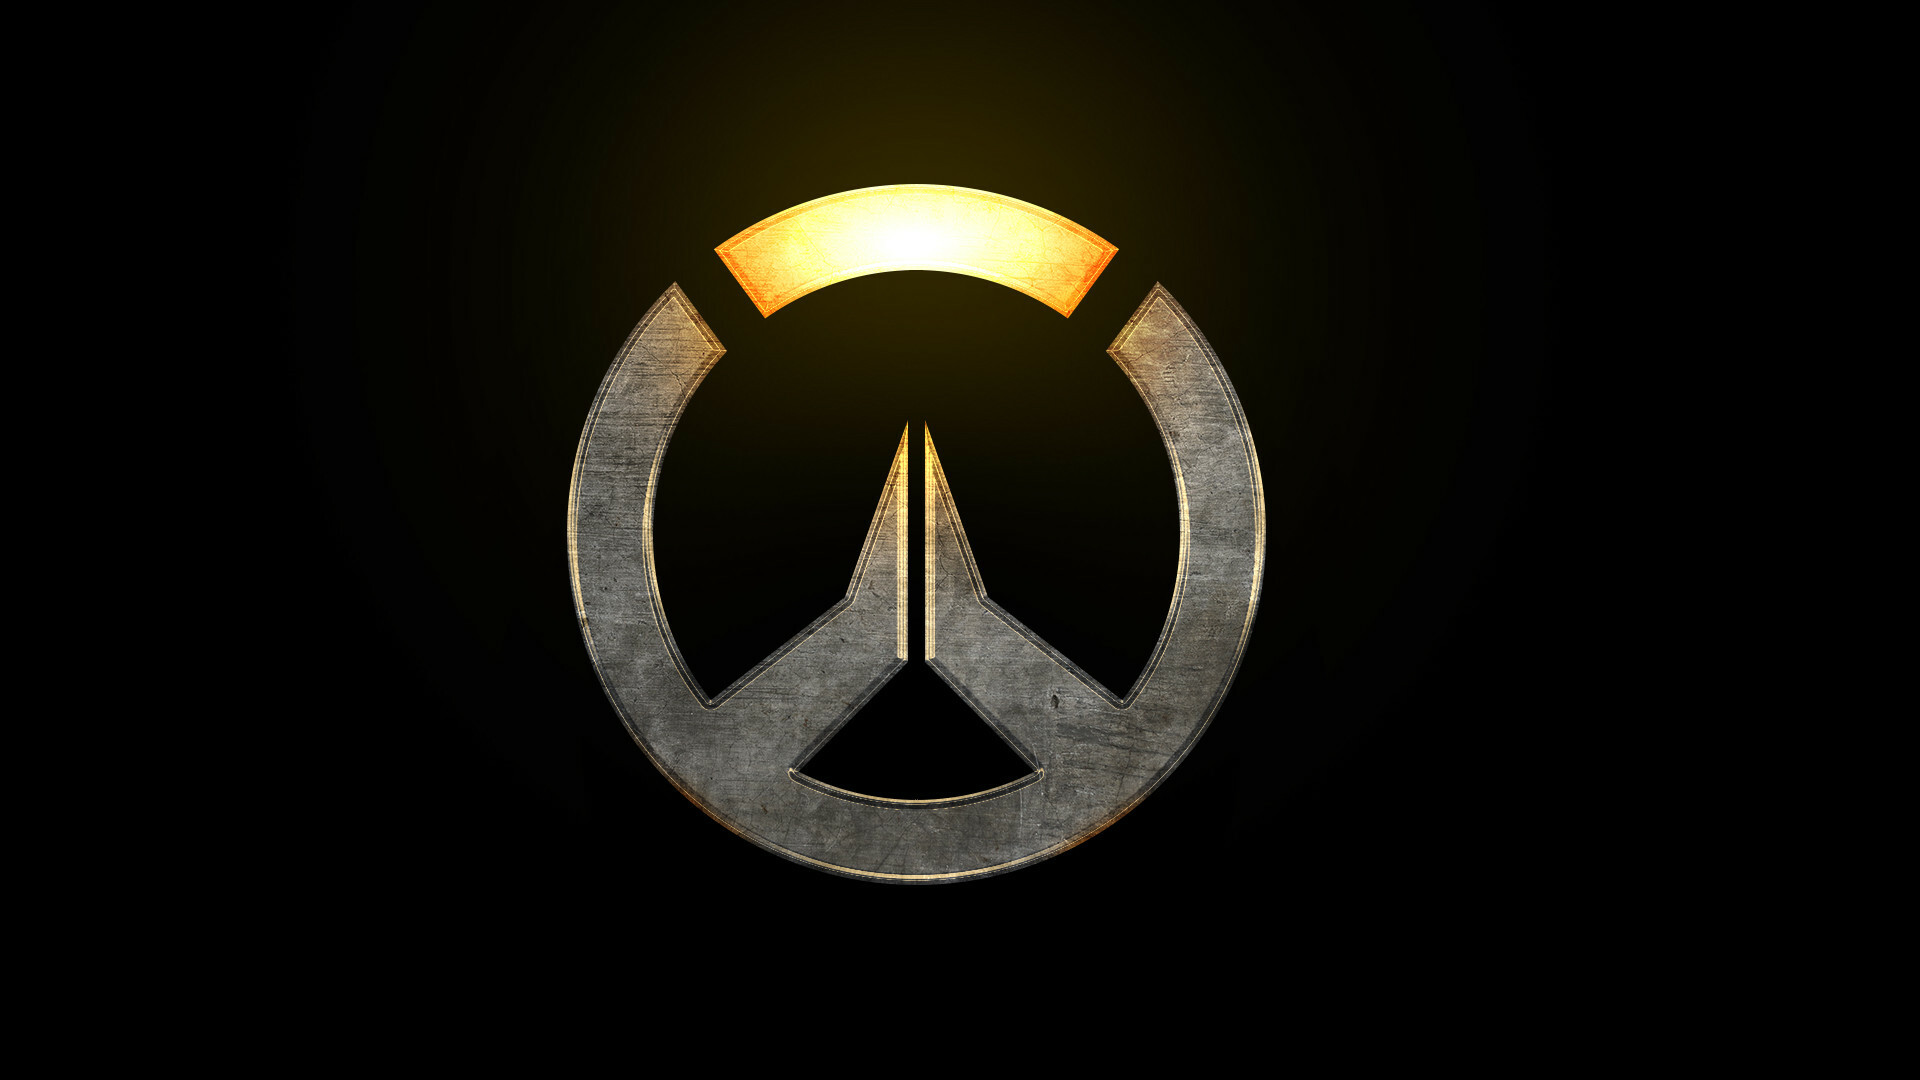 Overwatch: A multimedia franchise developed by Blizzard Entertainment. 1920x1080 Full HD Background.